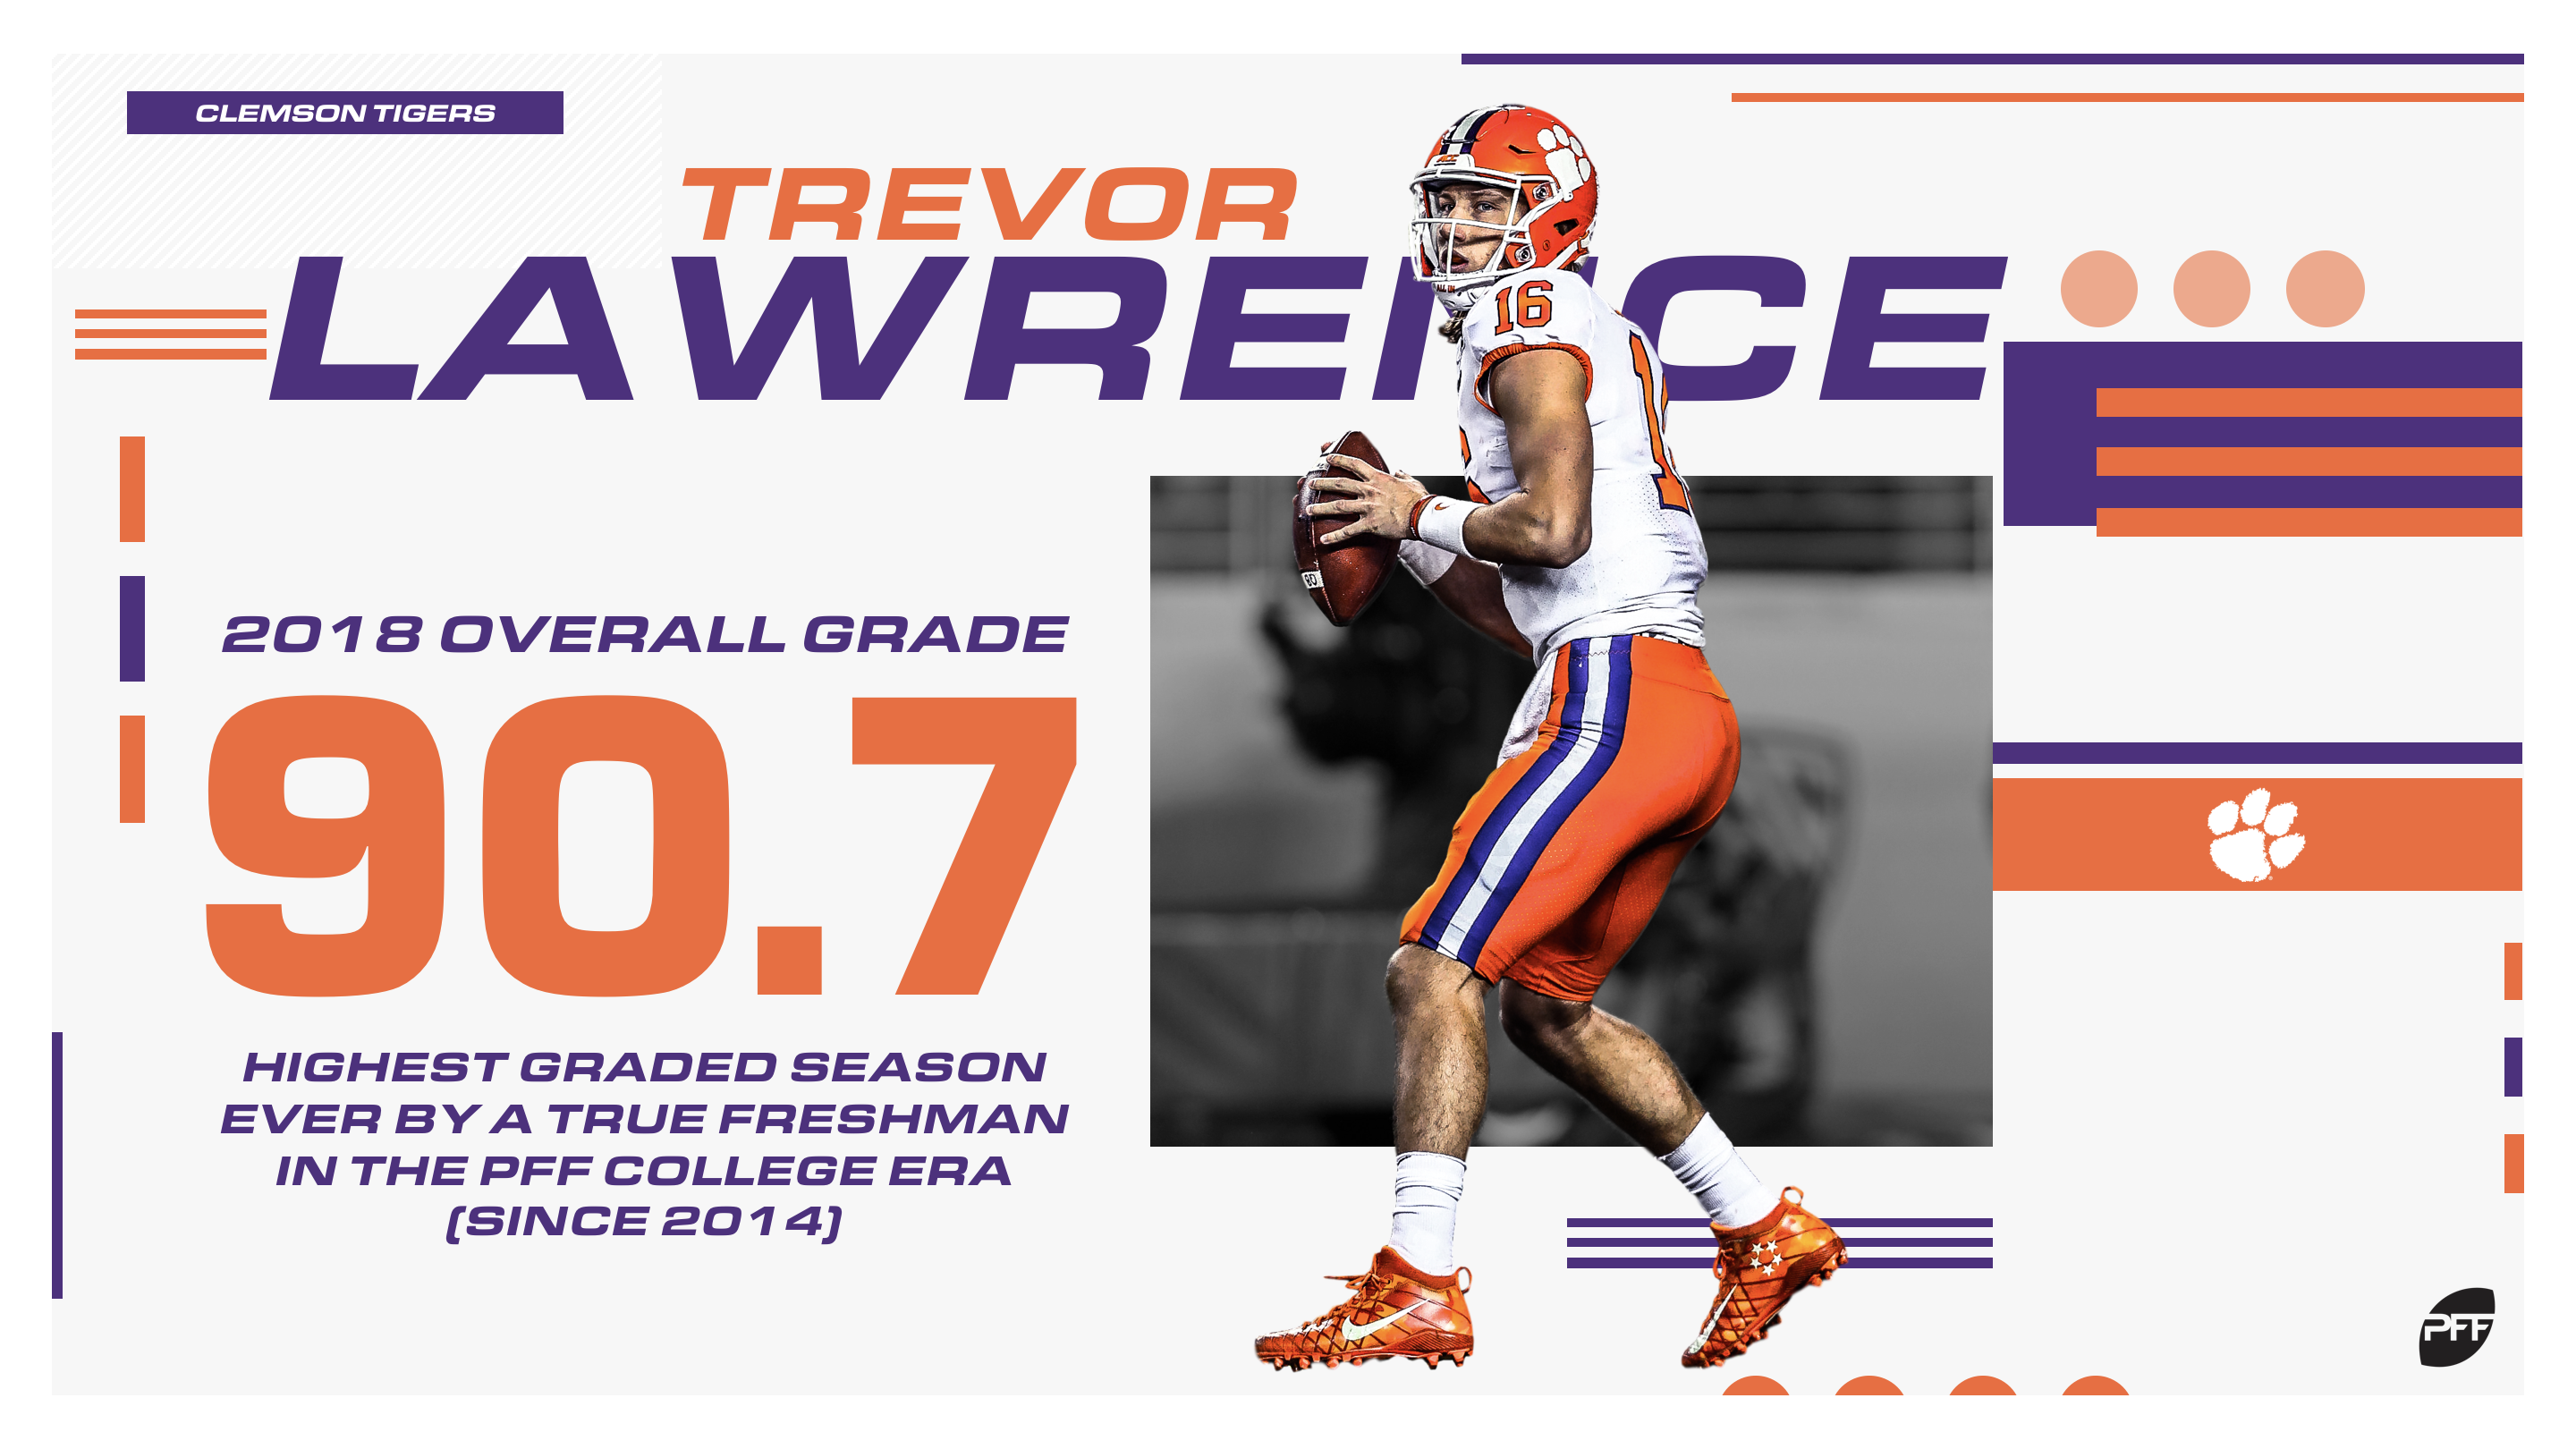 Trevor Lawrence's 2018 season among the best in PFF College history, NFL  Draft